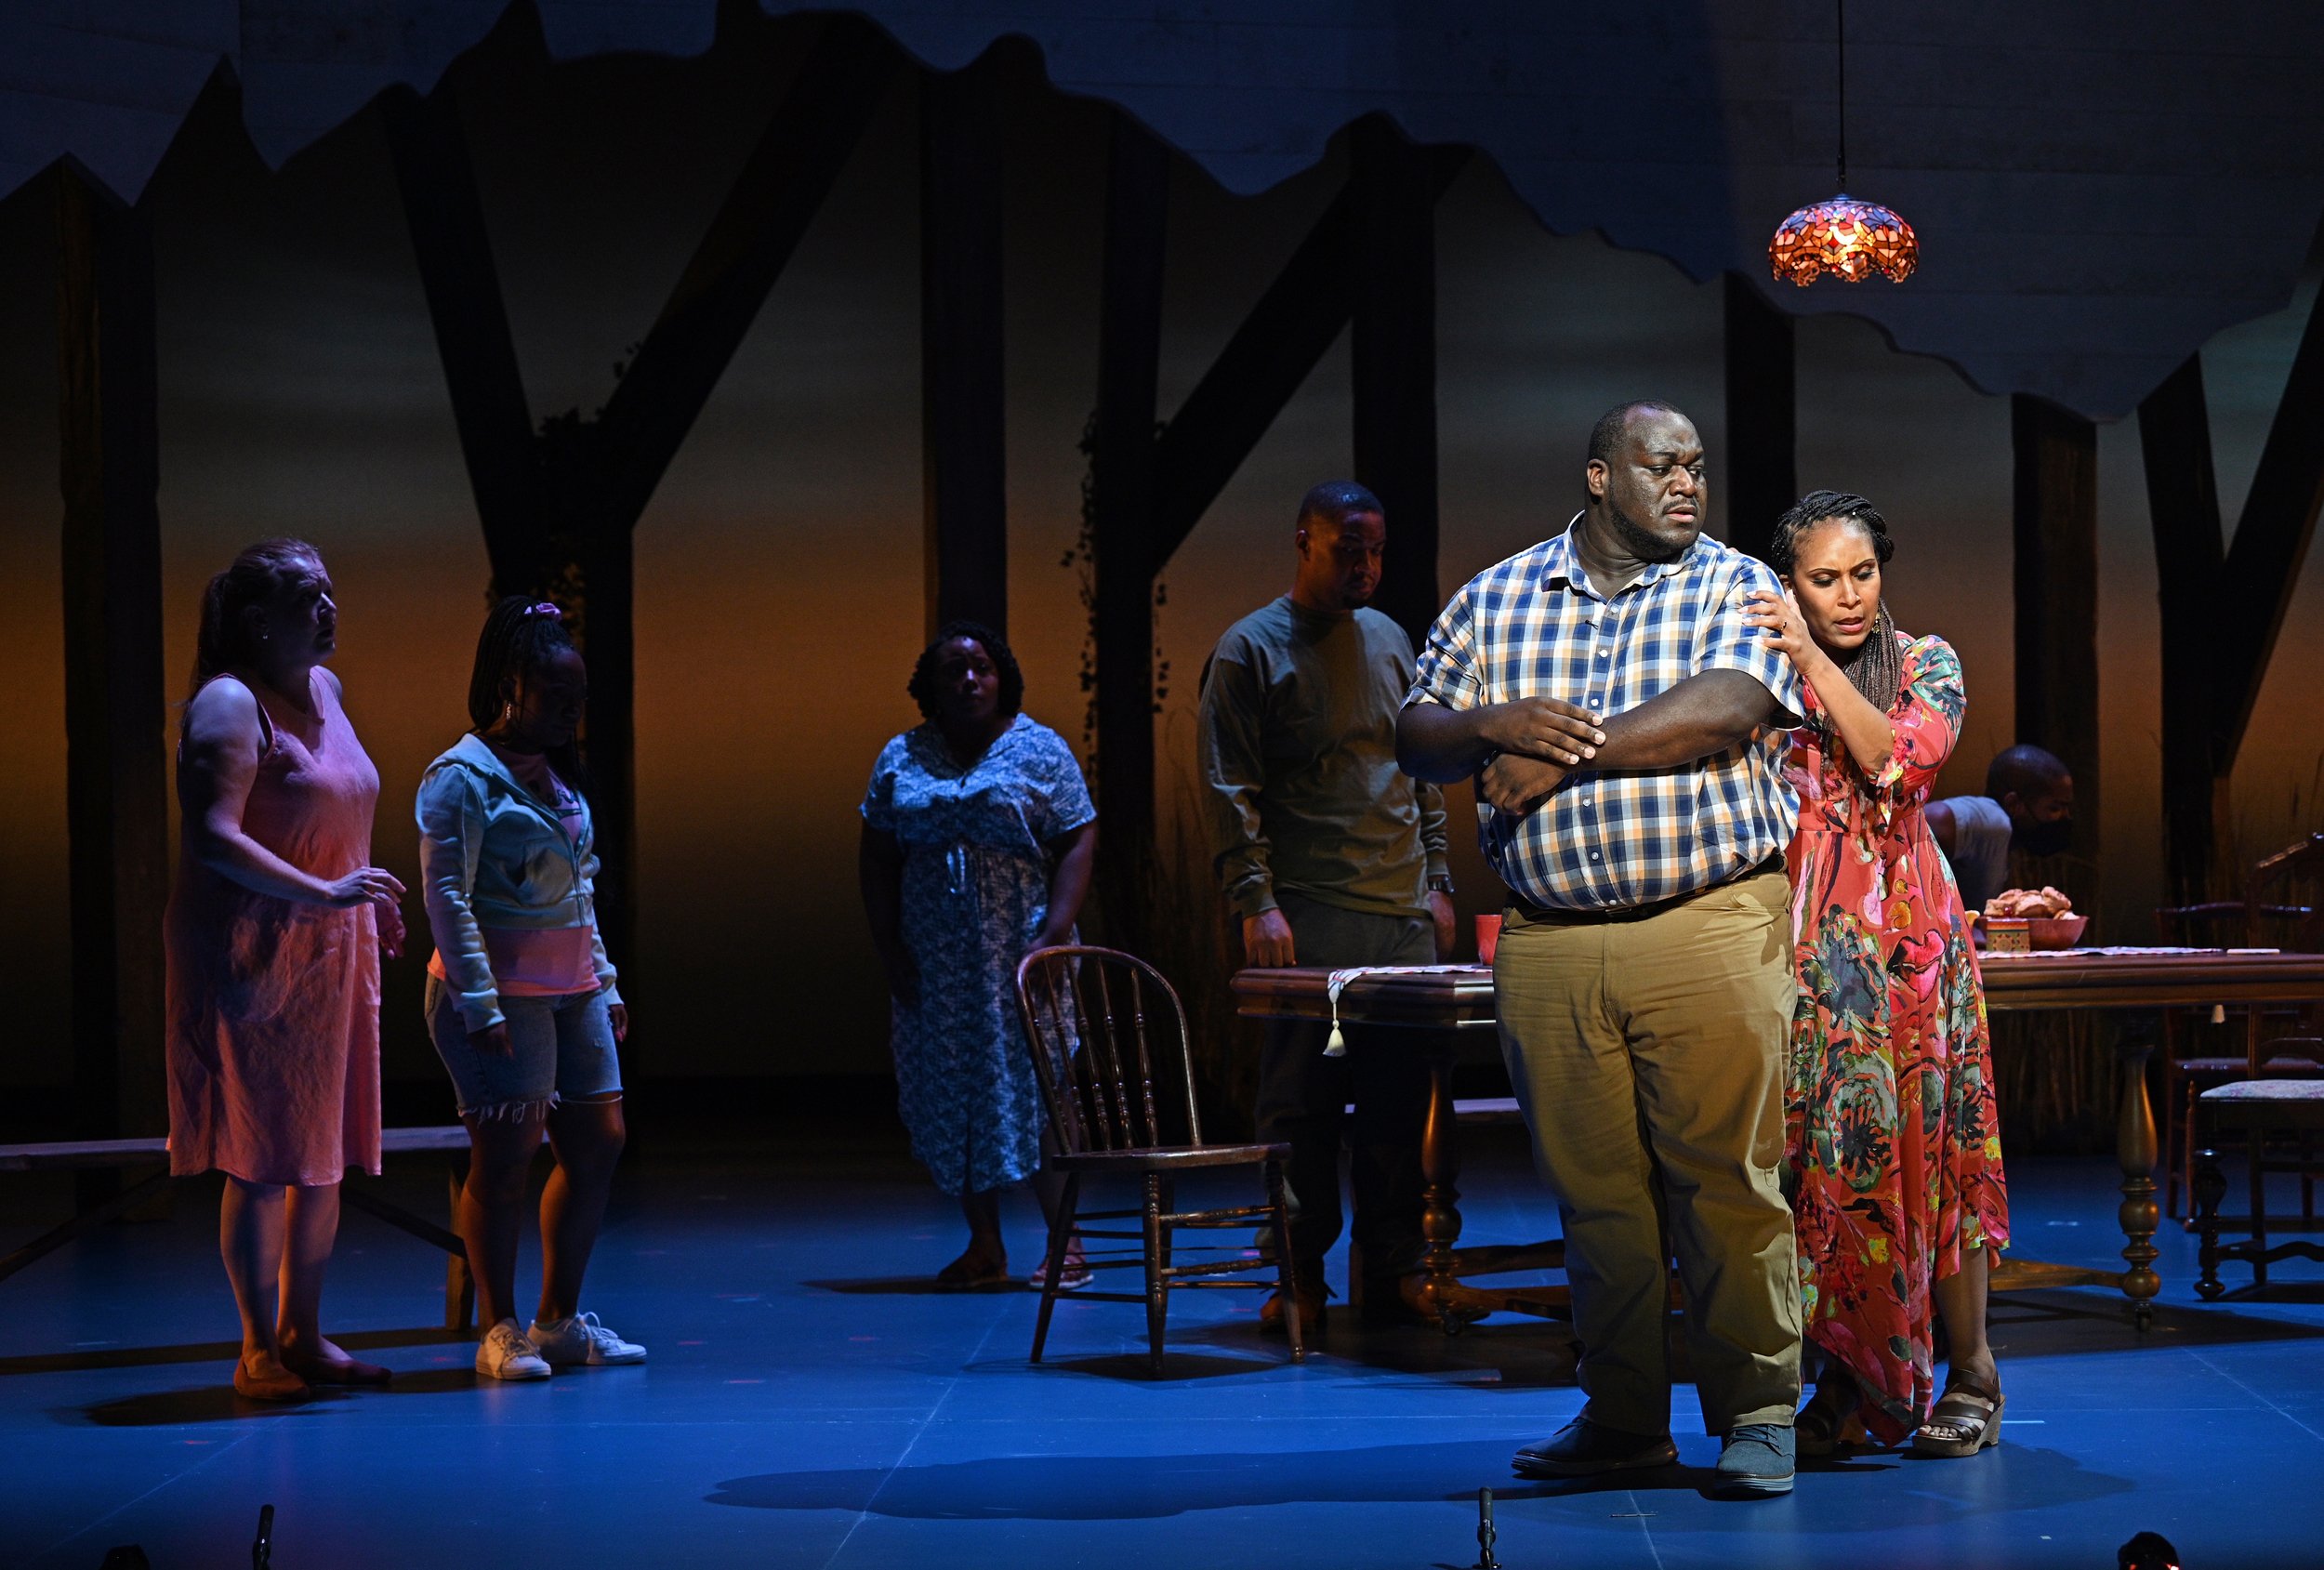  Castor (Reginald Smith Jr.) and Patience (Talise Trevigne), with (background L to R) Celeste (Jennifer Johnson Cano), Ruthie (Raven McMillon), Wilhelmina (Victoria Okafor), and West (Randell McGee). Photo by Philip Groshong. 